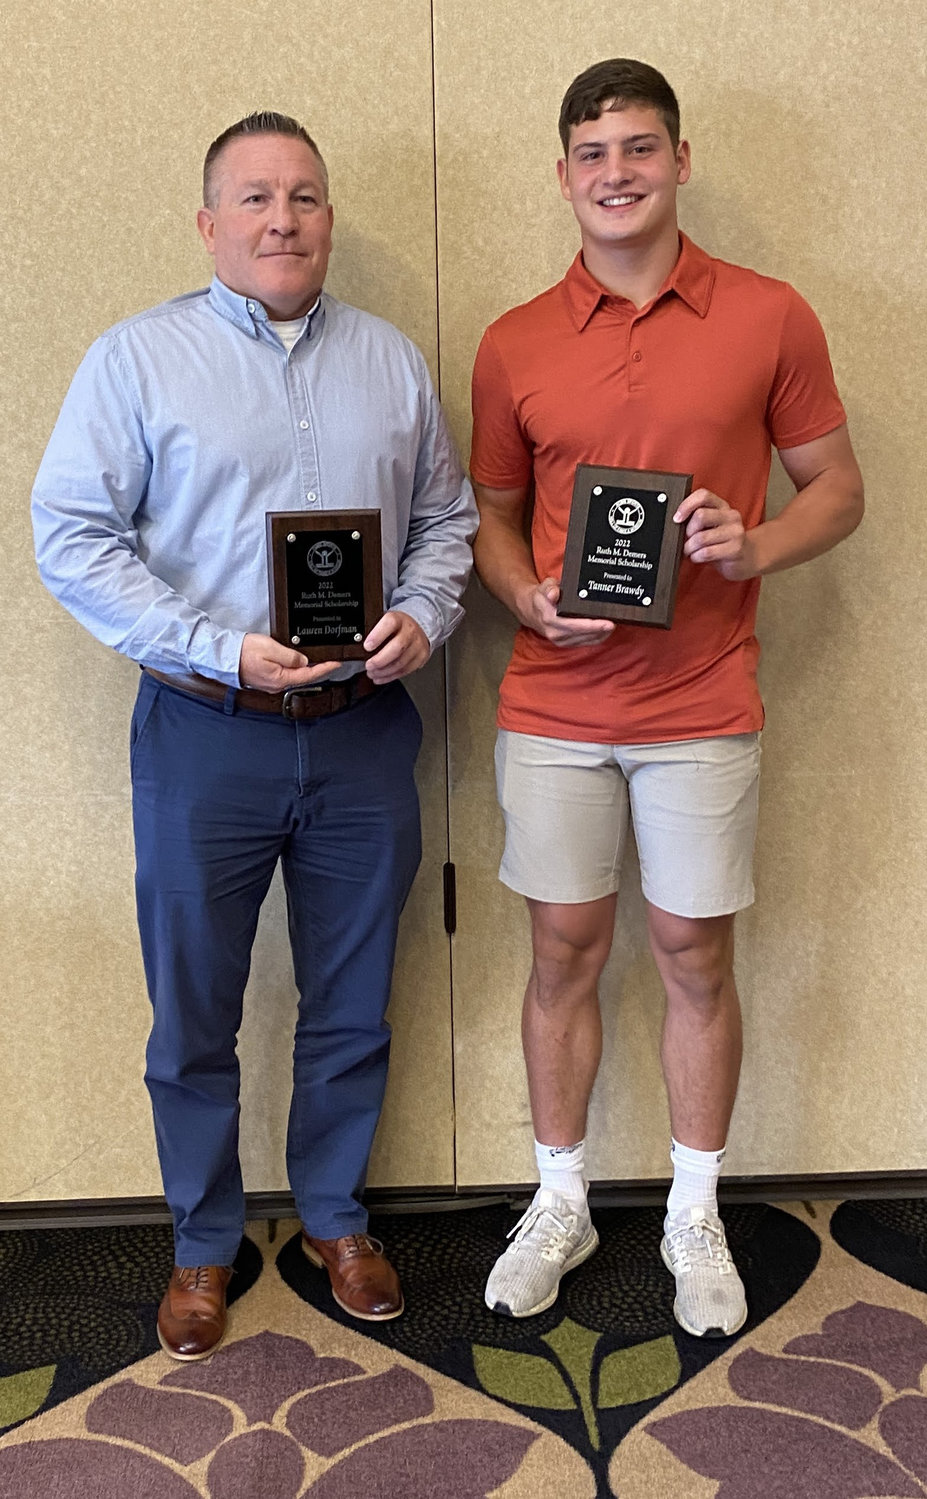 DEMERS SCHOLARSHIP — The Rome Sports Hall of Fame selected Lauren Dorfman and Tanner Brawdy as the Ruth Demers Scholarship winners this year. Pictured are Dorfman's father Krispen Dorfman and Brawdy.